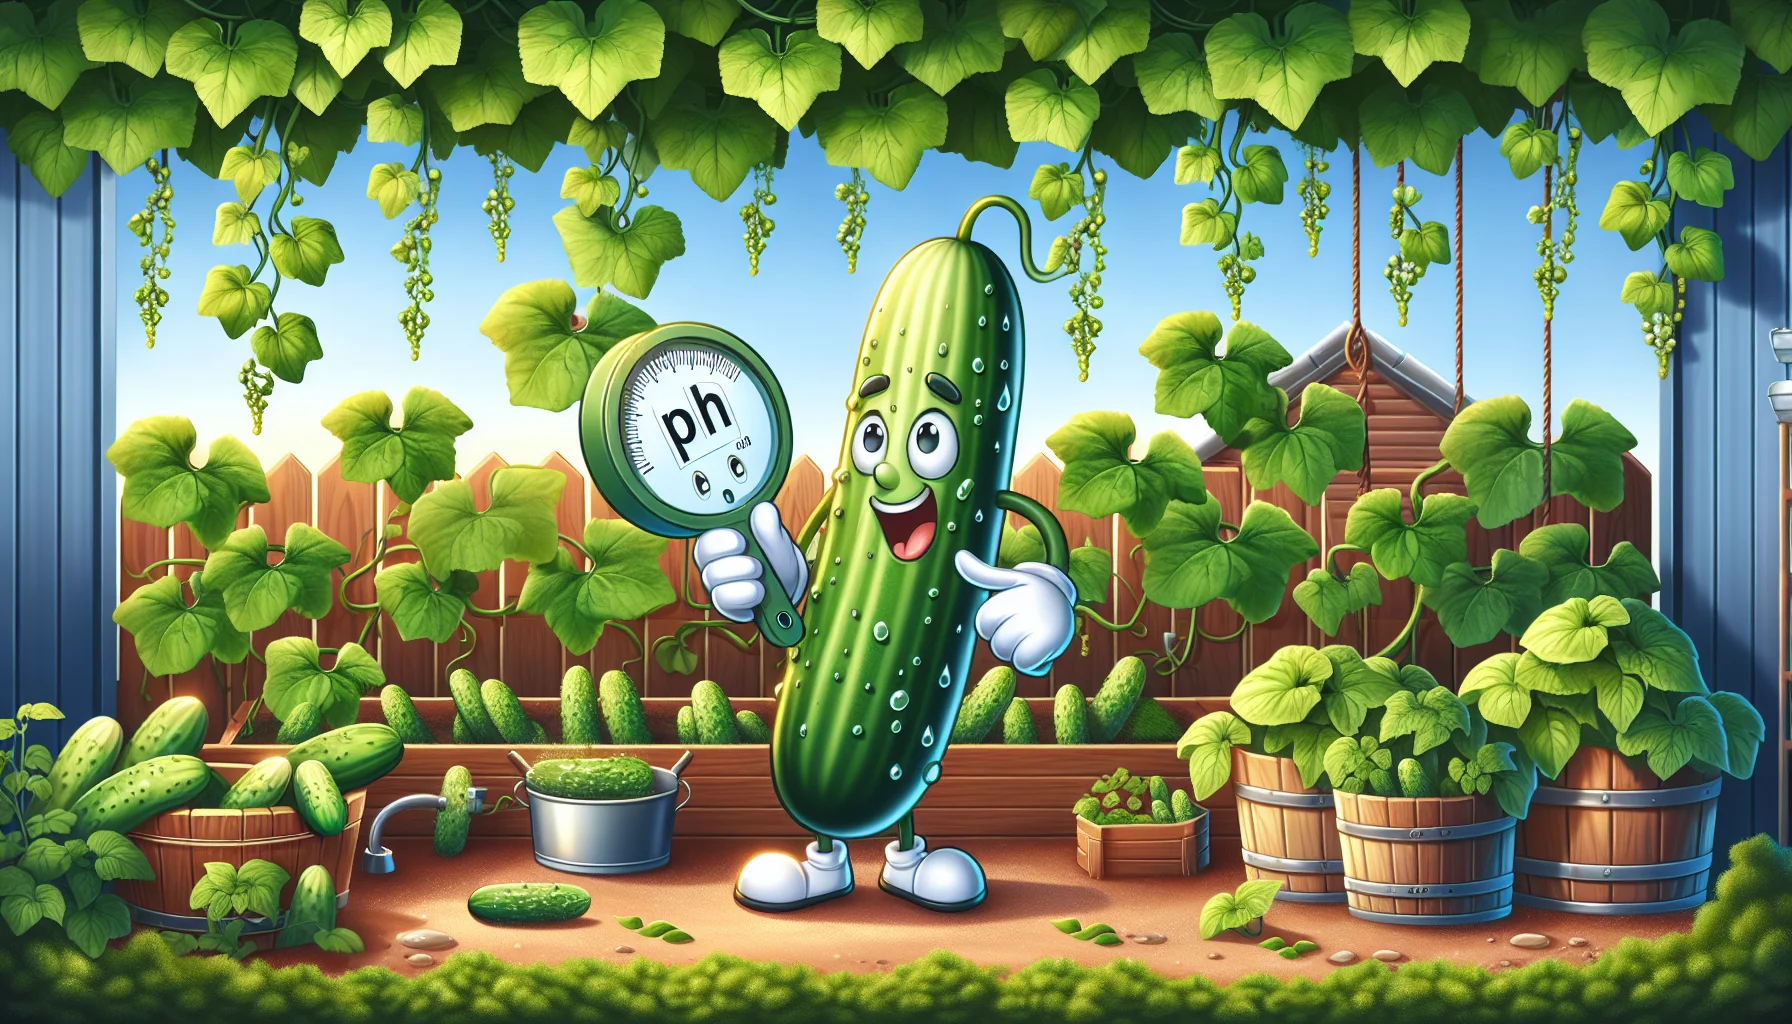 Create a humorous and realistic depiction of gardening with a focus on cucumbers. Picture a lovely garden filled with lush, healthy cucumber plants, hanging vines, and shiny green leaves. To link the concept of pH, we could have a cartoon-like pH meter character playfully interacting with a cucumber. It might measure the pH of a giant cucumber and appear amazed at its perfect pH level. All these elements inspire and entertain garden enthusiasts while subtly informing them about the significance of maintaining appropriate pH in gardening.